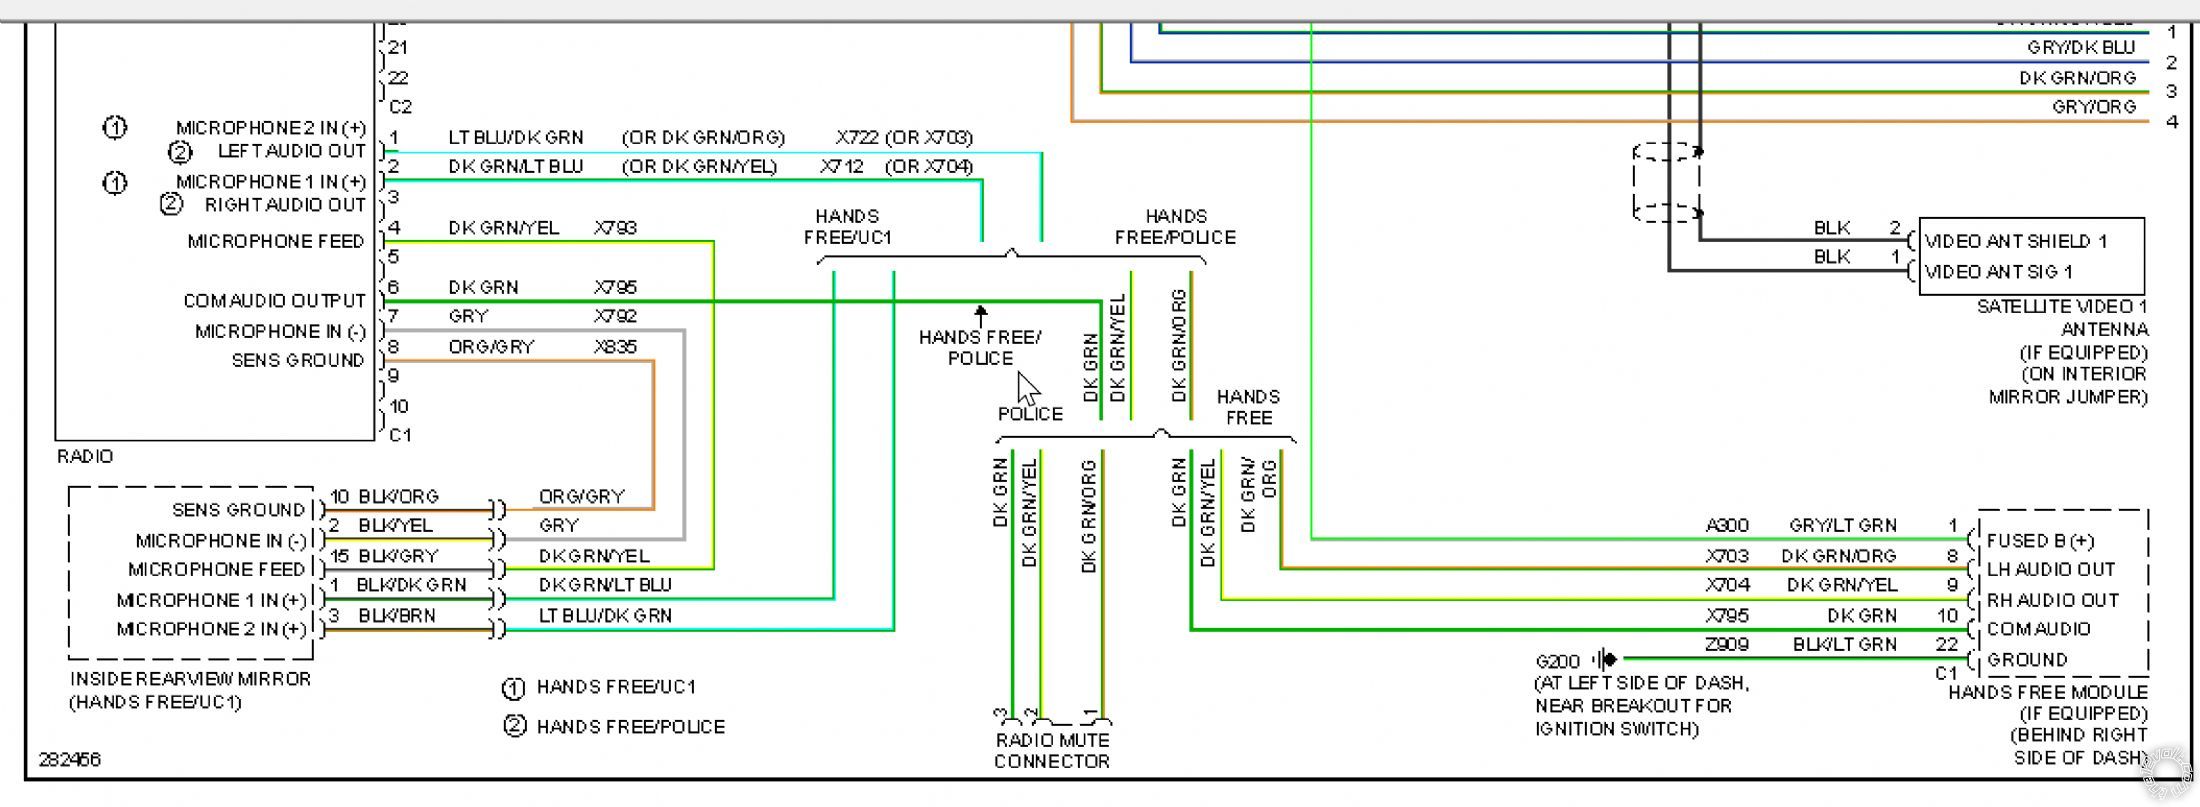 1997 Dodge Neon Radio Wiring Diagram from www.the12volt.com